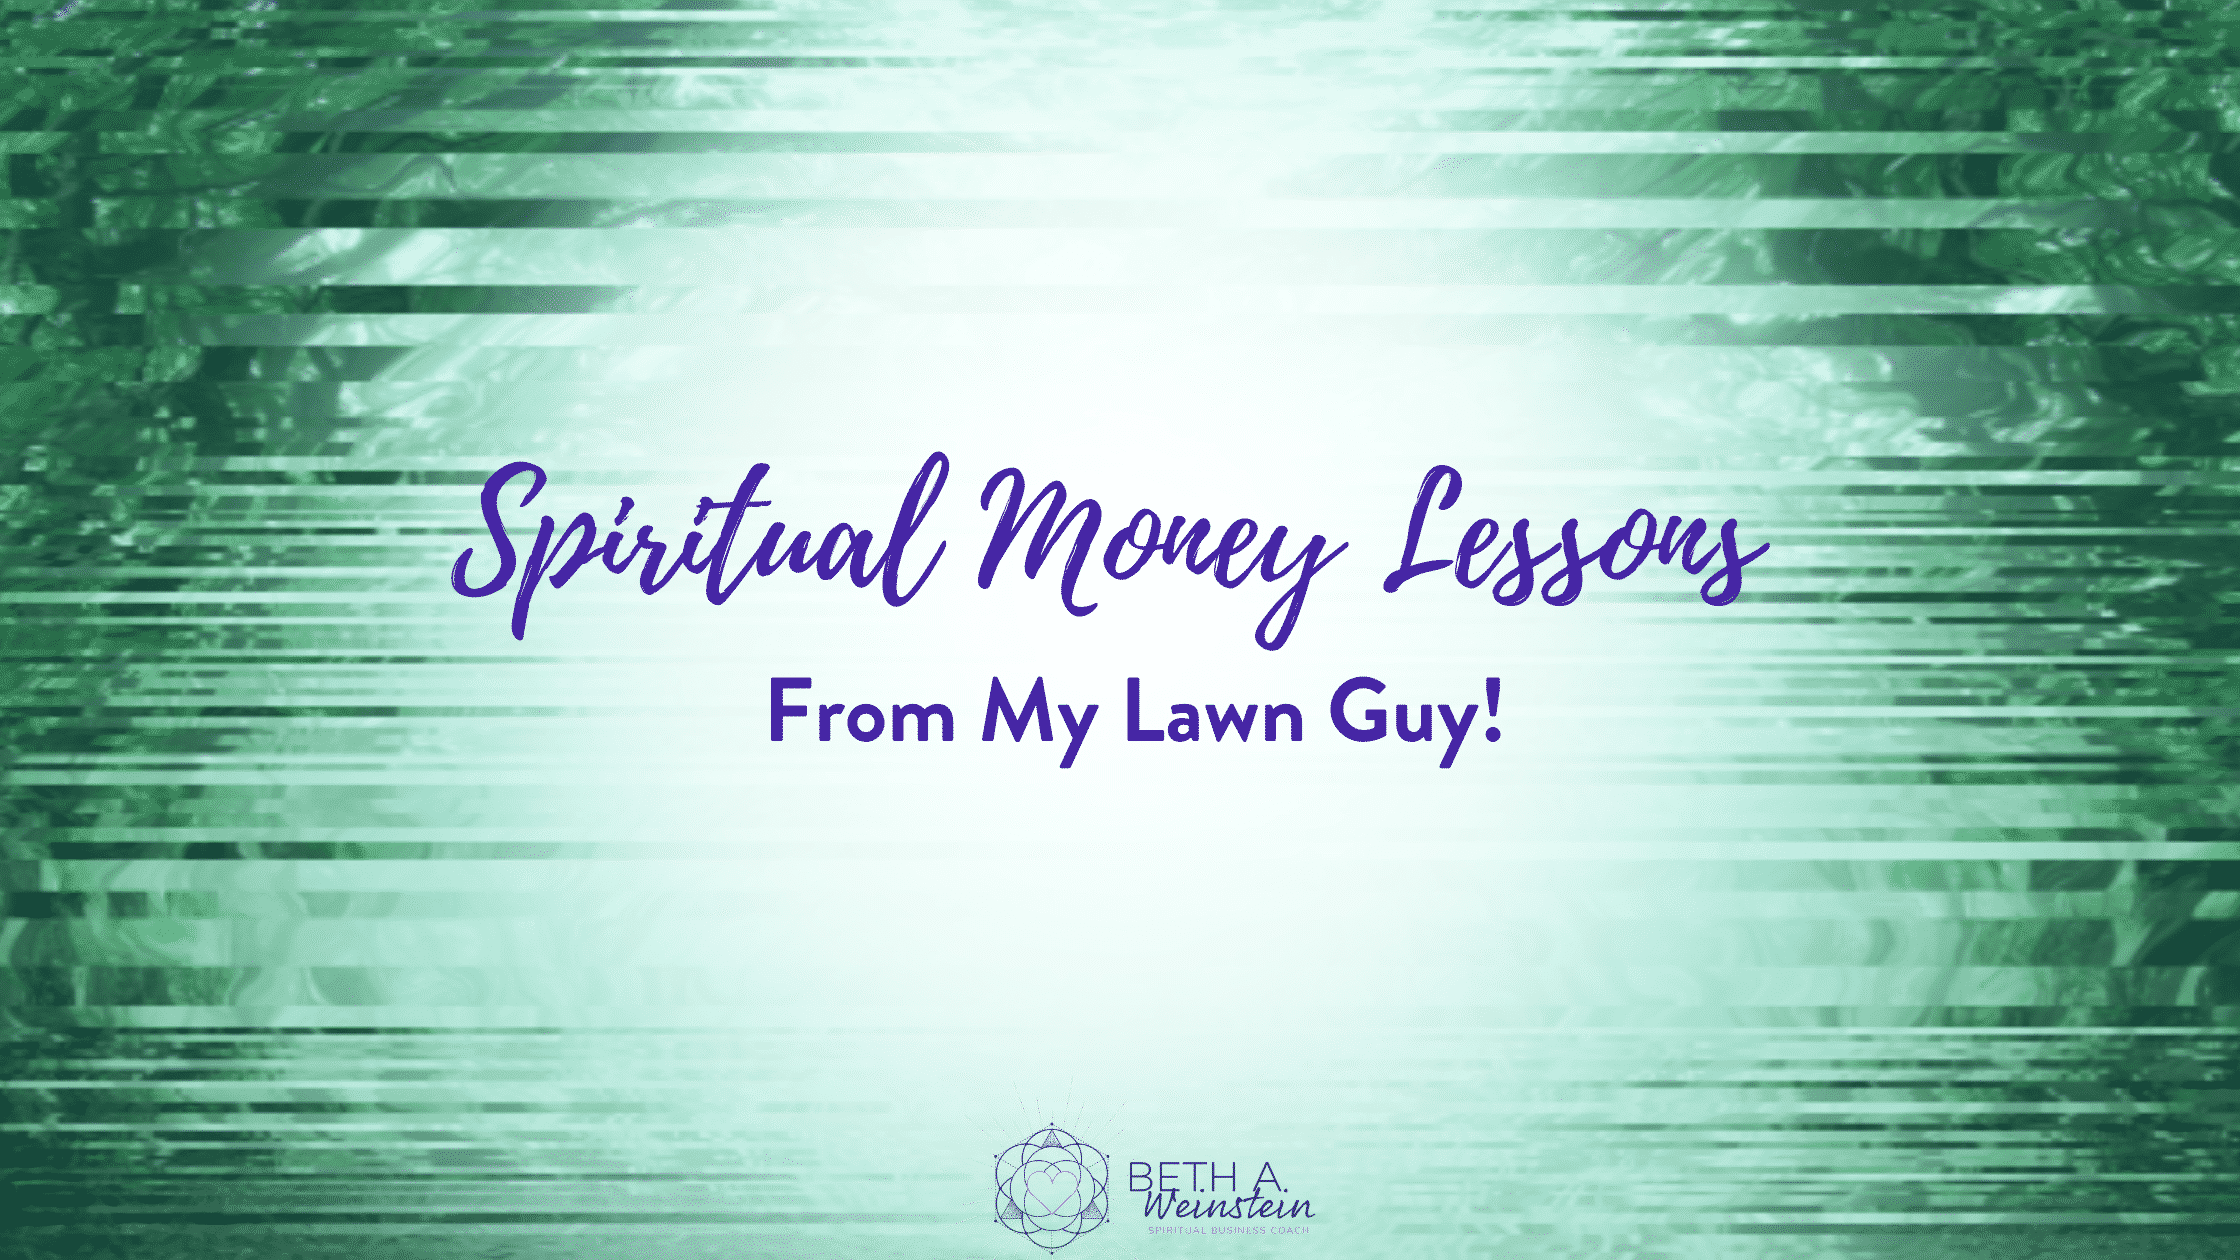 Spiritual Money Lessons from My Lawn Guy